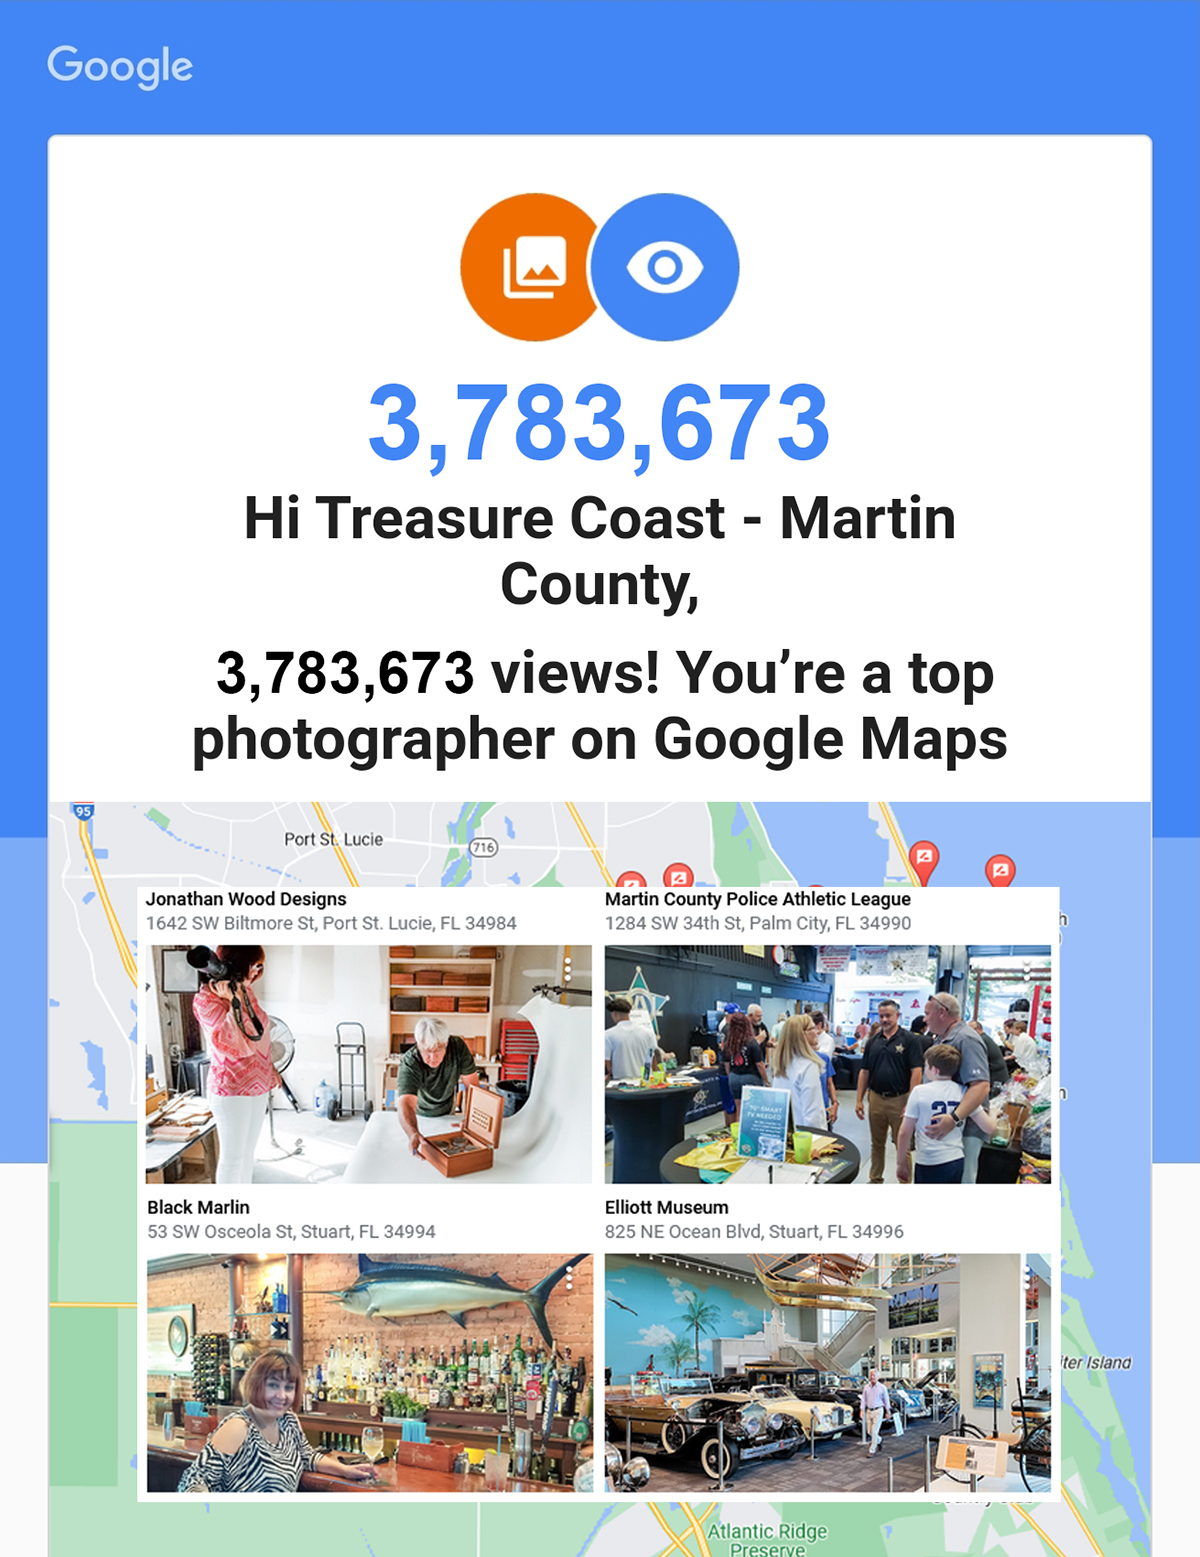 Treasure Coast Biz - Martin County Lifestyle Magazine: social media marketing, content creators and managers, professional photography and video production, graphics and websites design